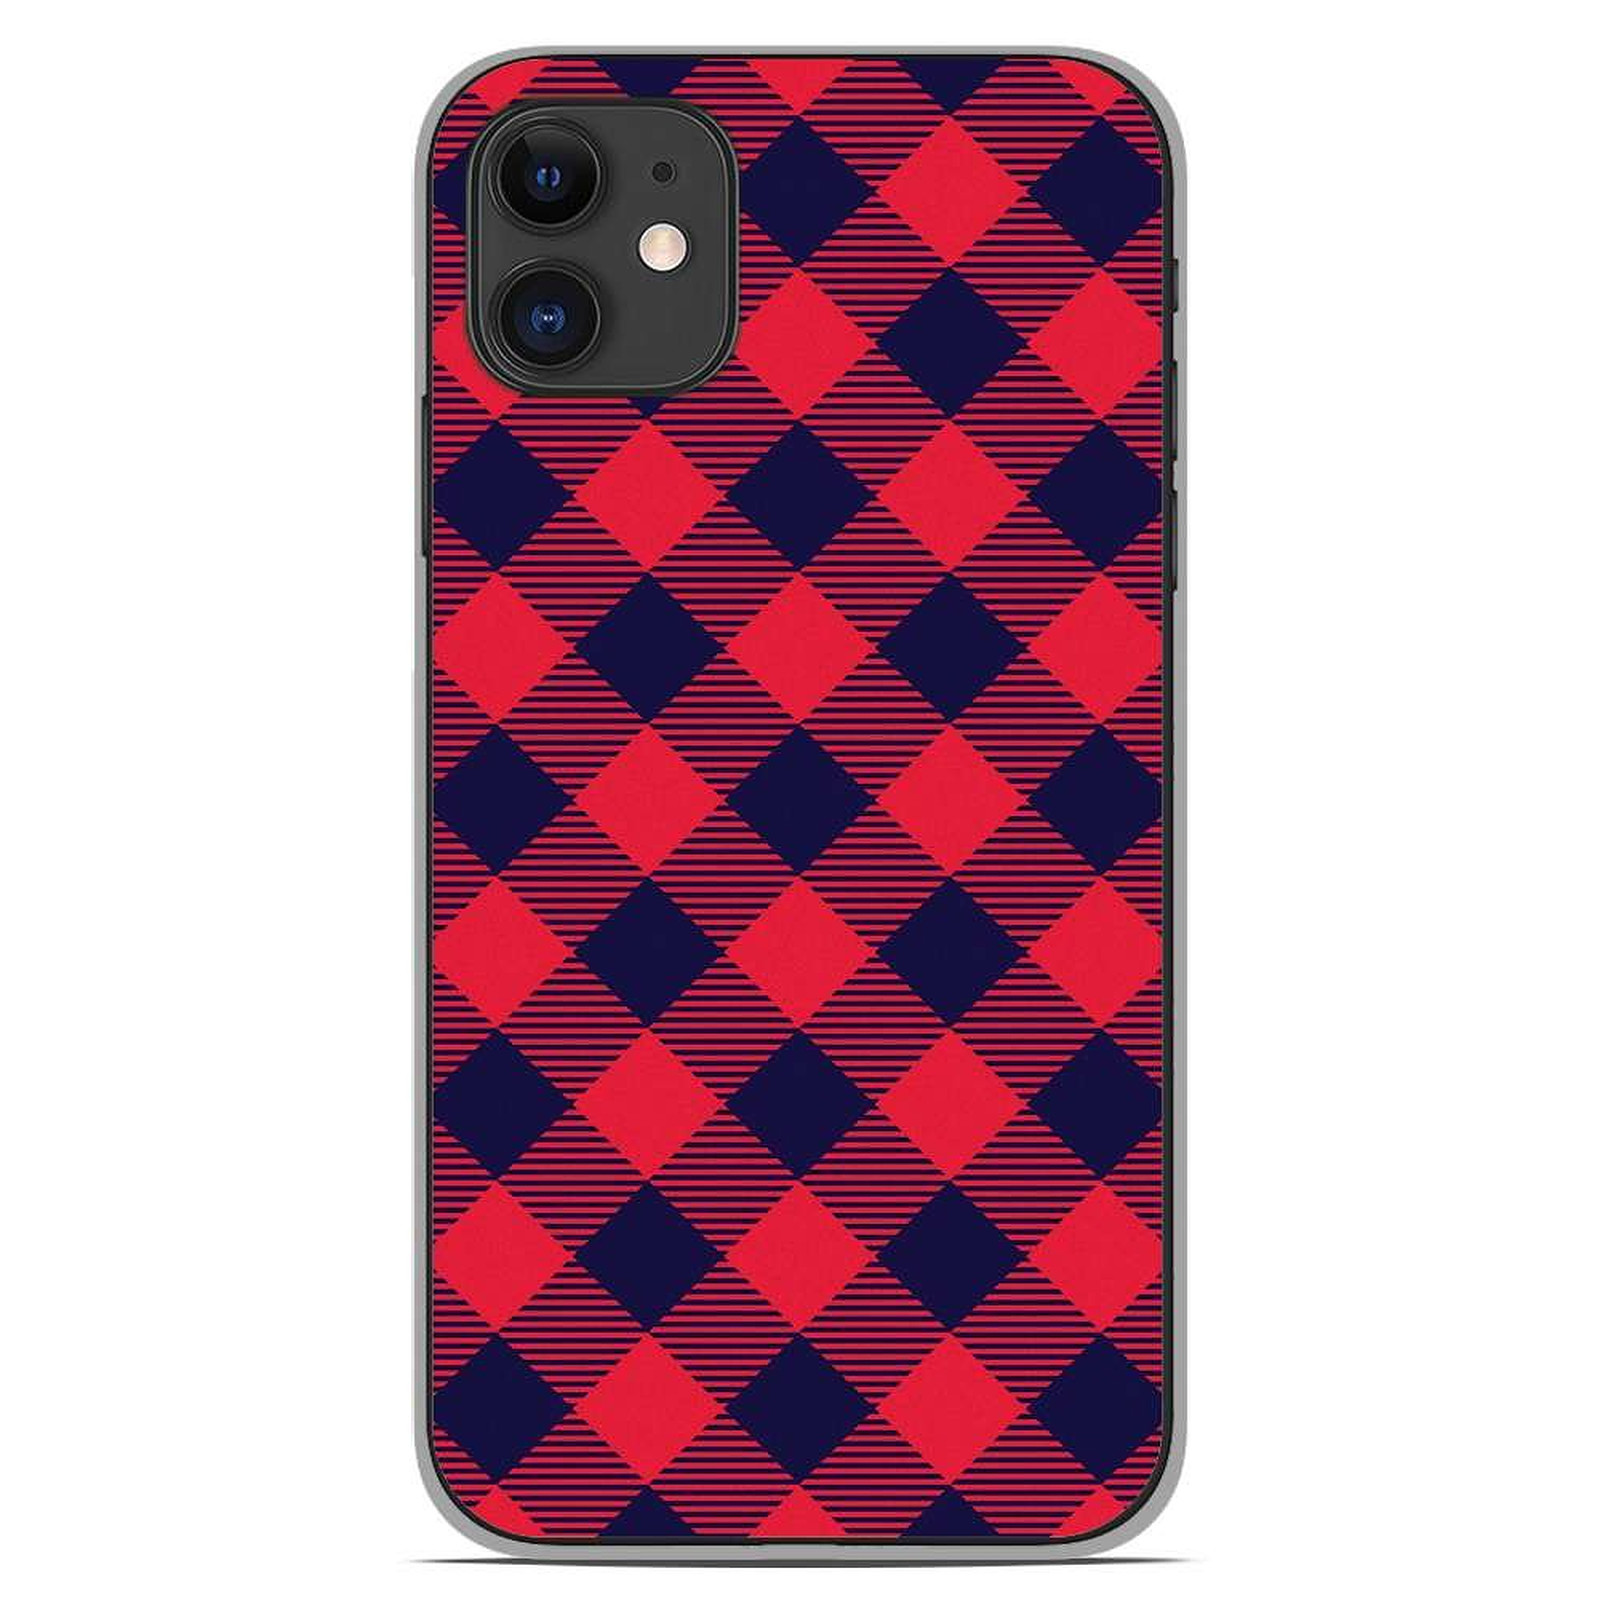 1001 Coques Coque silicone gel Apple iPhone 11 motif Tartan Rouge - Coque telephone 1001Coques